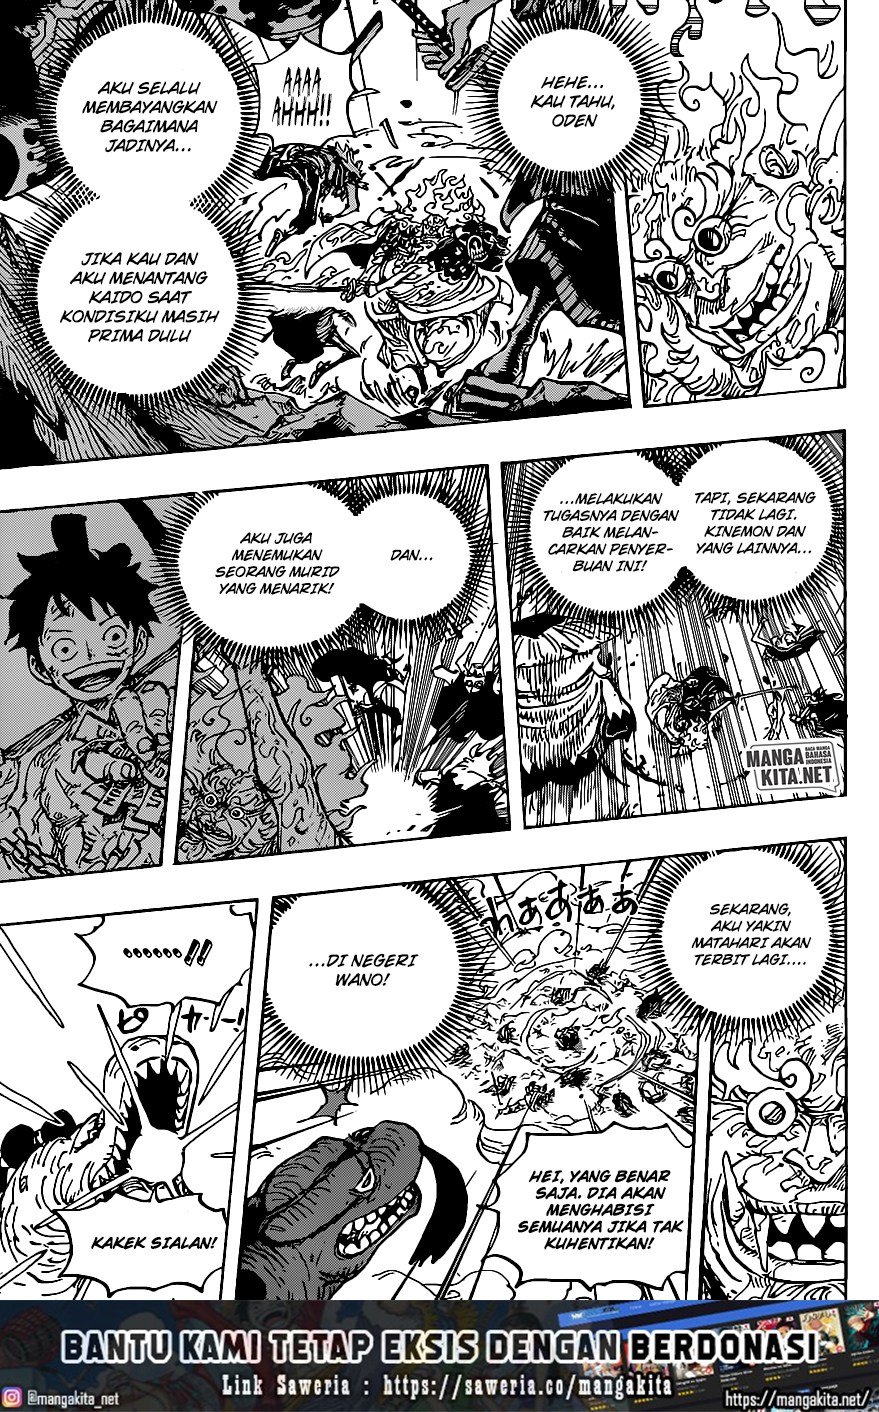 One Piece Chapter 1006 Hq - 147